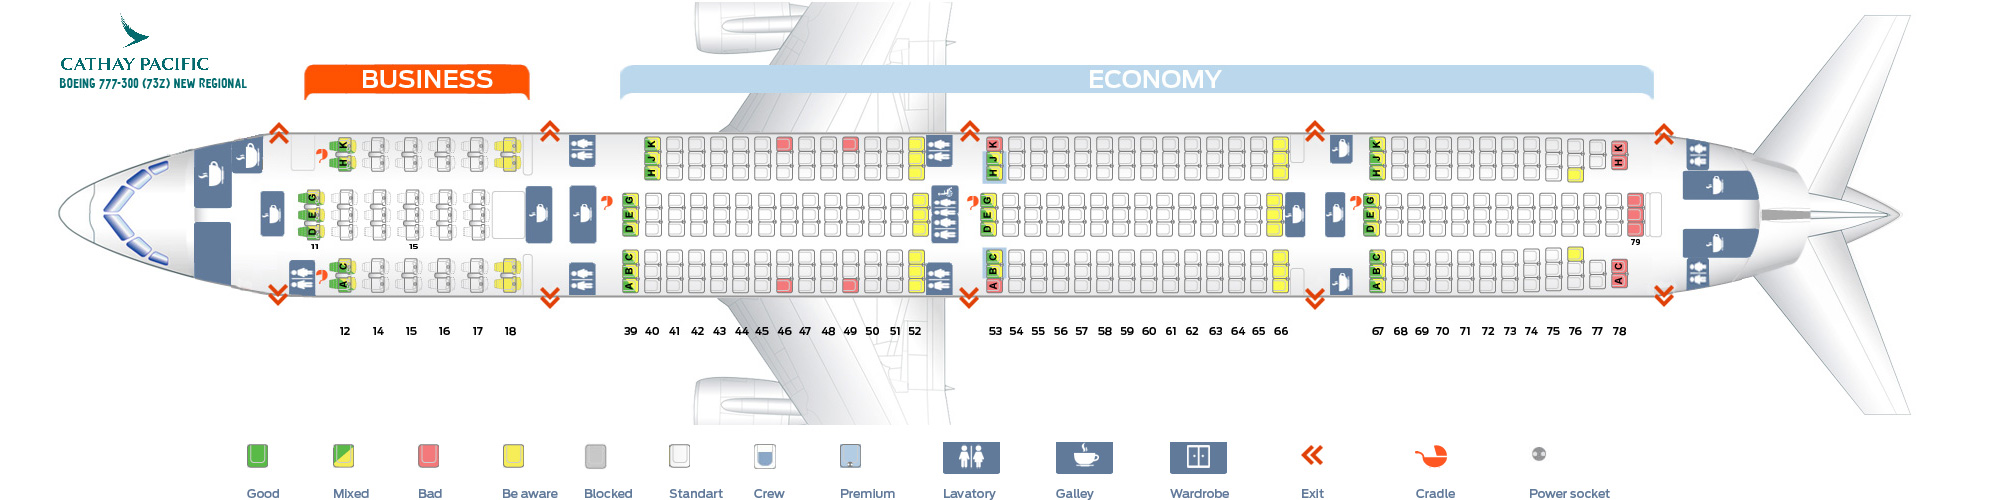 Cathay Pacific Boeing 777 300er Seating Chart